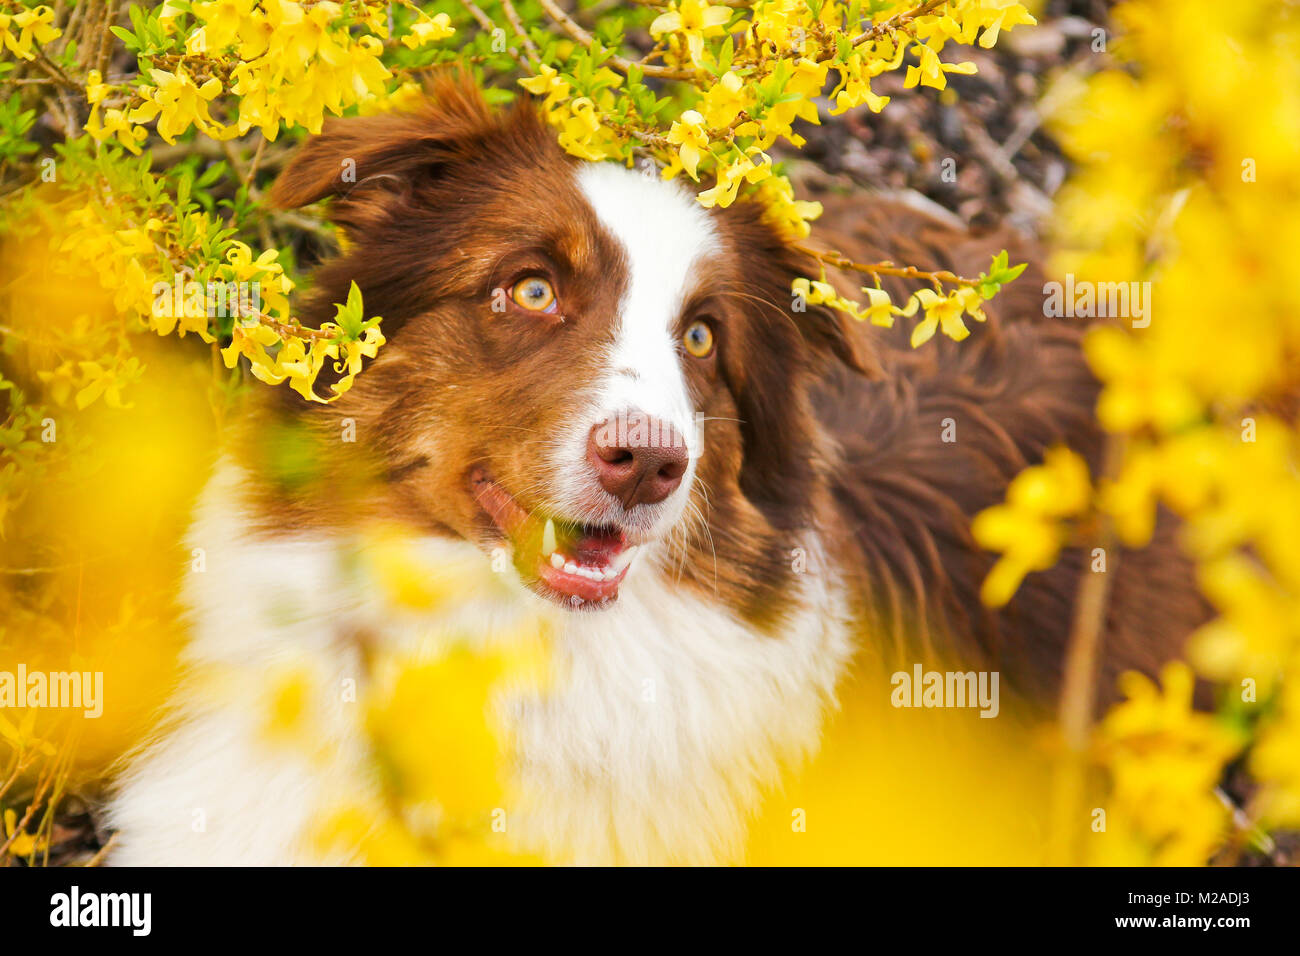 A cute dog is standing in a bush with flowers, looking up and smiling. Stock Photo